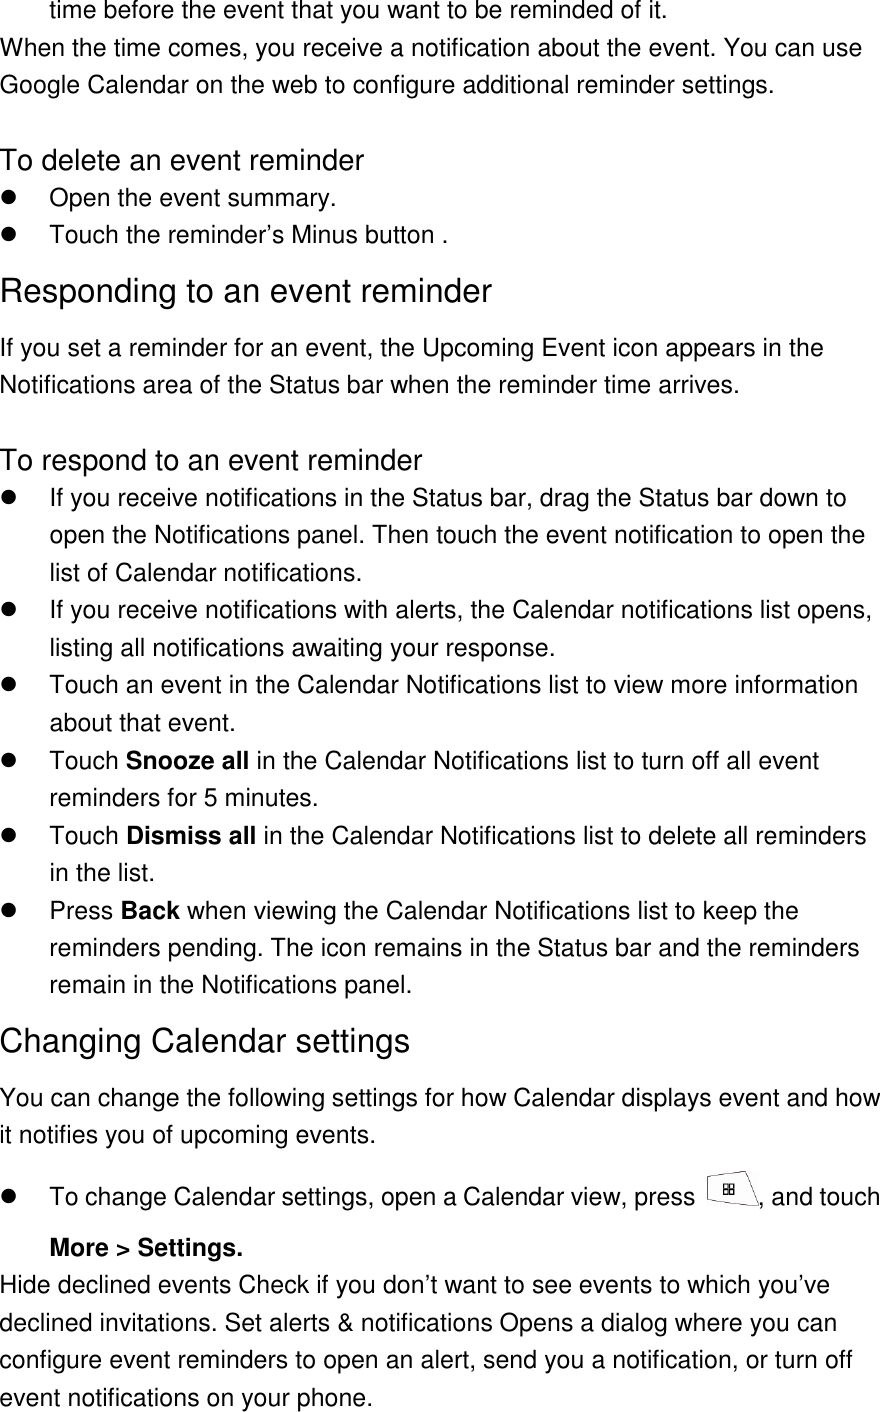 time before the event that you want to be reminded of it. When the time comes, you receive a notification about the event. You can use Google Calendar on the web to configure additional reminder settings.  To delete an event reminder   Open the event summary.   Touch the reminder’s Minus button . Responding to an event reminder If you set a reminder for an event, the Upcoming Event icon appears in the Notifications area of the Status bar when the reminder time arrives.    To respond to an event reminder   If you receive notifications in the Status bar, drag the Status bar down to open the Notifications panel. Then touch the event notification to open the list of Calendar notifications.   If you receive notifications with alerts, the Calendar notifications list opens, listing all notifications awaiting your response.   Touch an event in the Calendar Notifications list to view more information about that event.   Touch Snooze all in the Calendar Notifications list to turn off all event reminders for 5 minutes.   Touch Dismiss all in the Calendar Notifications list to delete all reminders in the list.   Press Back when viewing the Calendar Notifications list to keep the reminders pending. The icon remains in the Status bar and the reminders remain in the Notifications panel. Changing Calendar settings You can change the following settings for how Calendar displays event and how it notifies you of upcoming events.   To change Calendar settings, open a Calendar view, press  , and touch More &gt; Settings. Hide declined events Check if you don’t want to see events to which you’ve declined invitations. Set alerts &amp; notifications Opens a dialog where you can configure event reminders to open an alert, send you a notification, or turn off event notifications on your phone.   